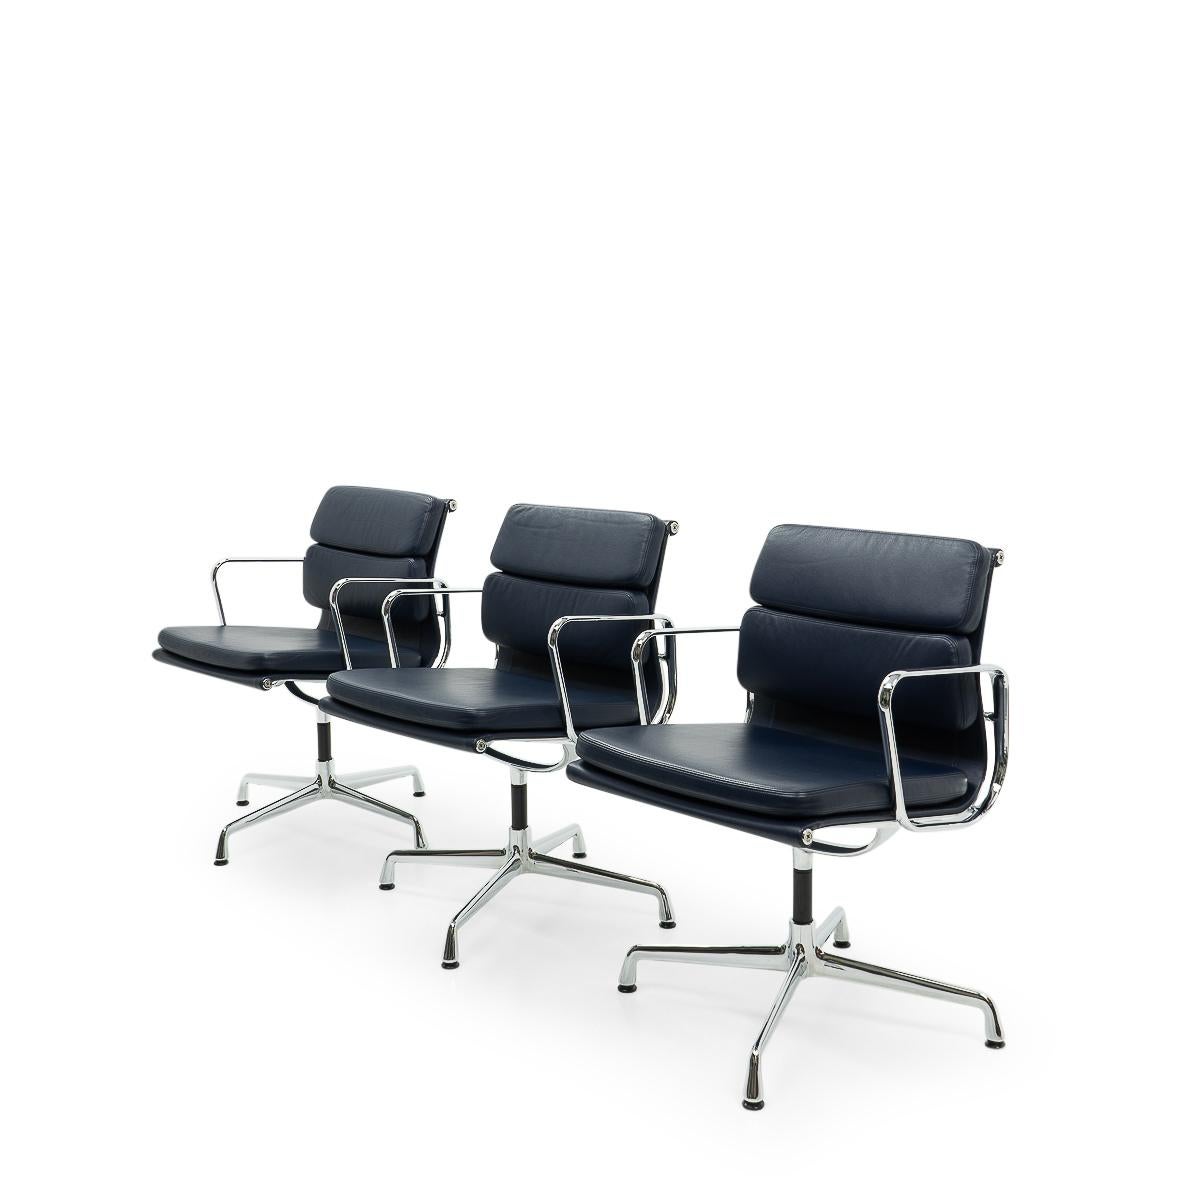 The Aluminum group chairs by Charles & Ray Eames are one of the most important designs of the 20th Century. Their original design from the 1950s is still relevant today, giving interiors all over the world a touch of modern elegance.


On offer we